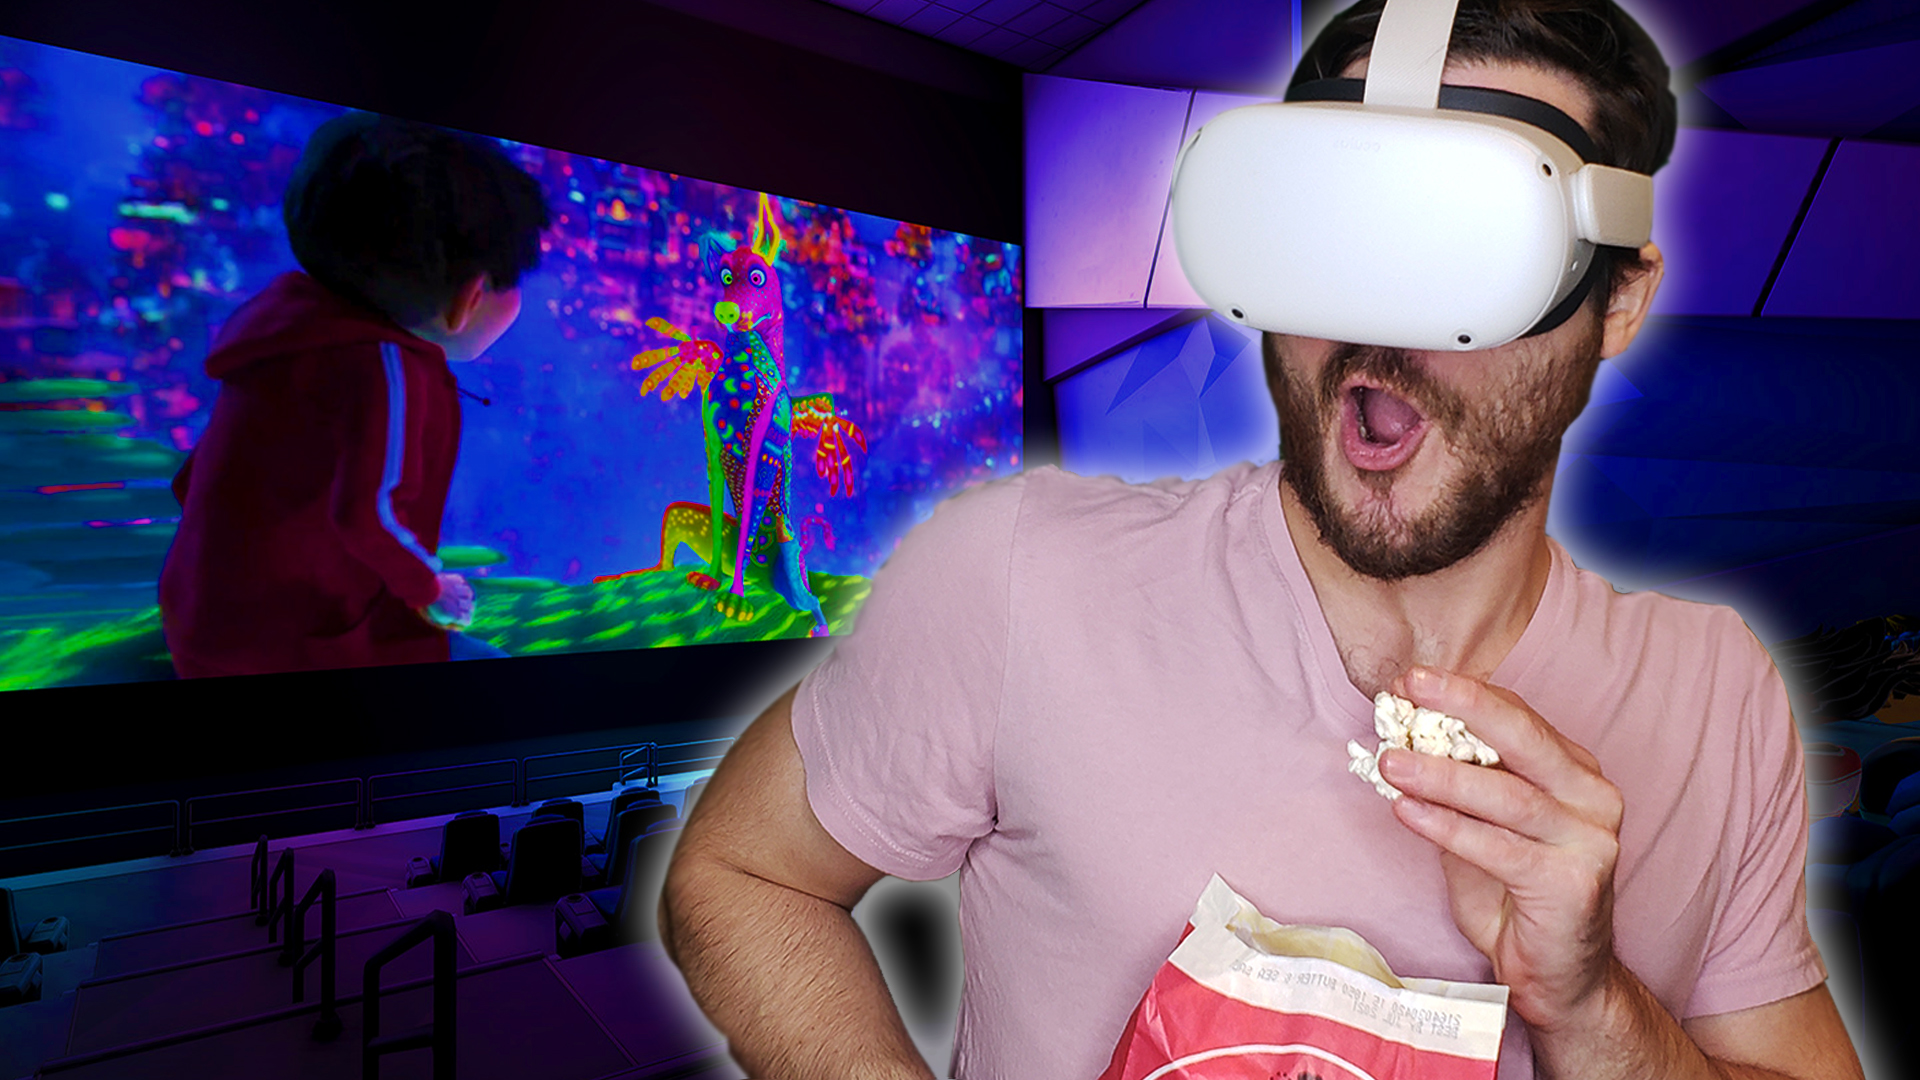 oculus quest games to play with friends